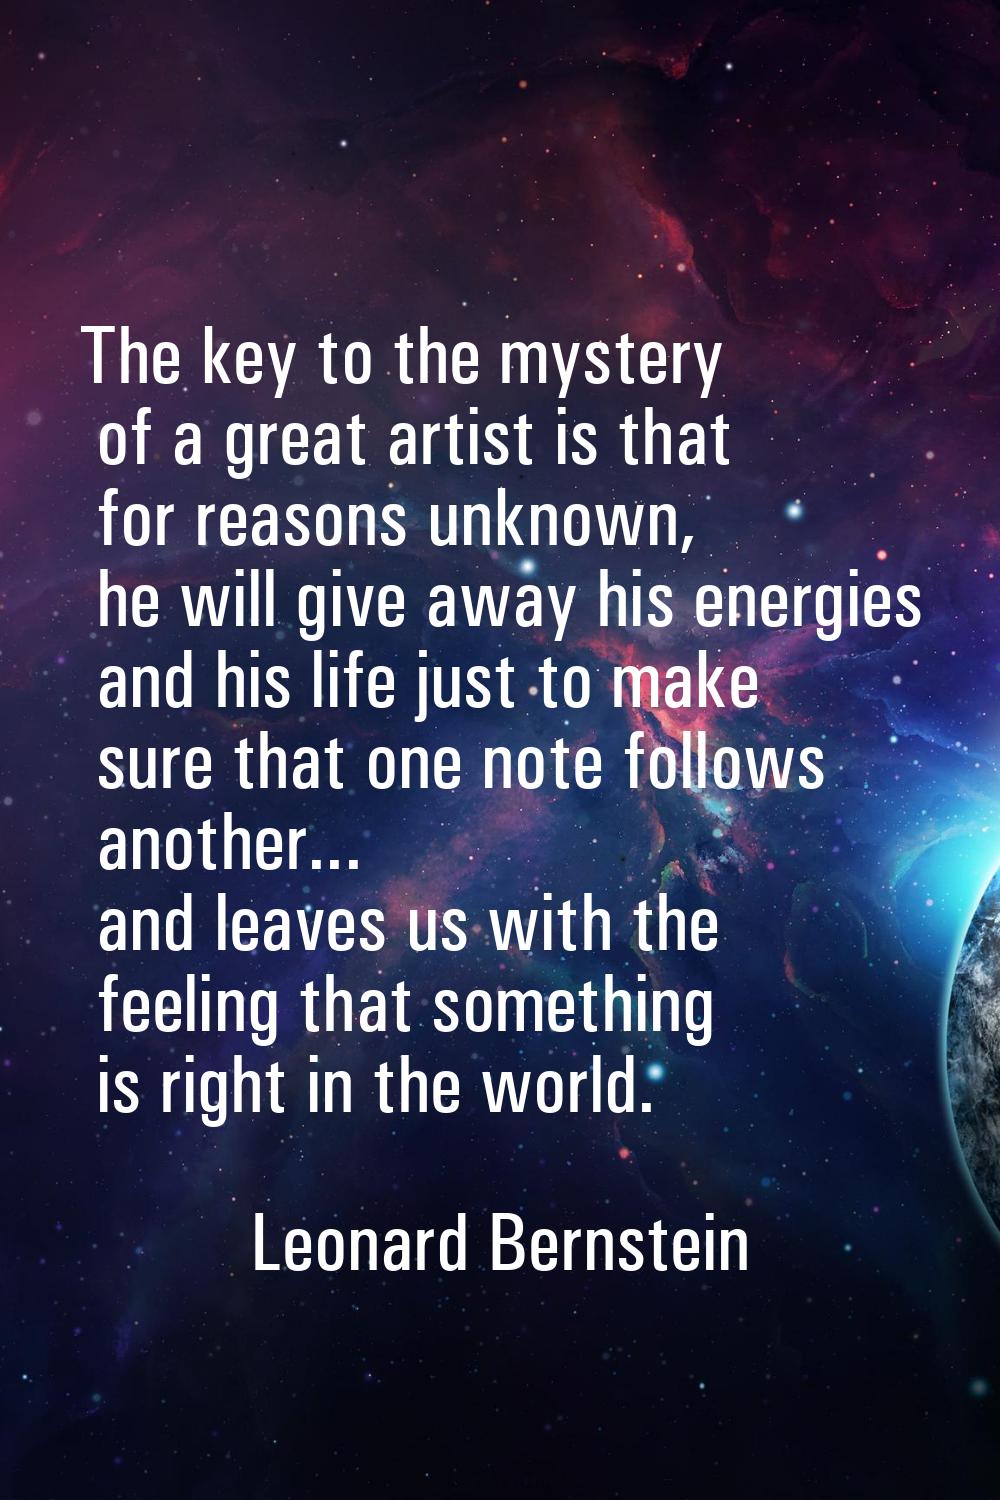 The key to the mystery of a great artist is that for reasons unknown, he will give away his energie